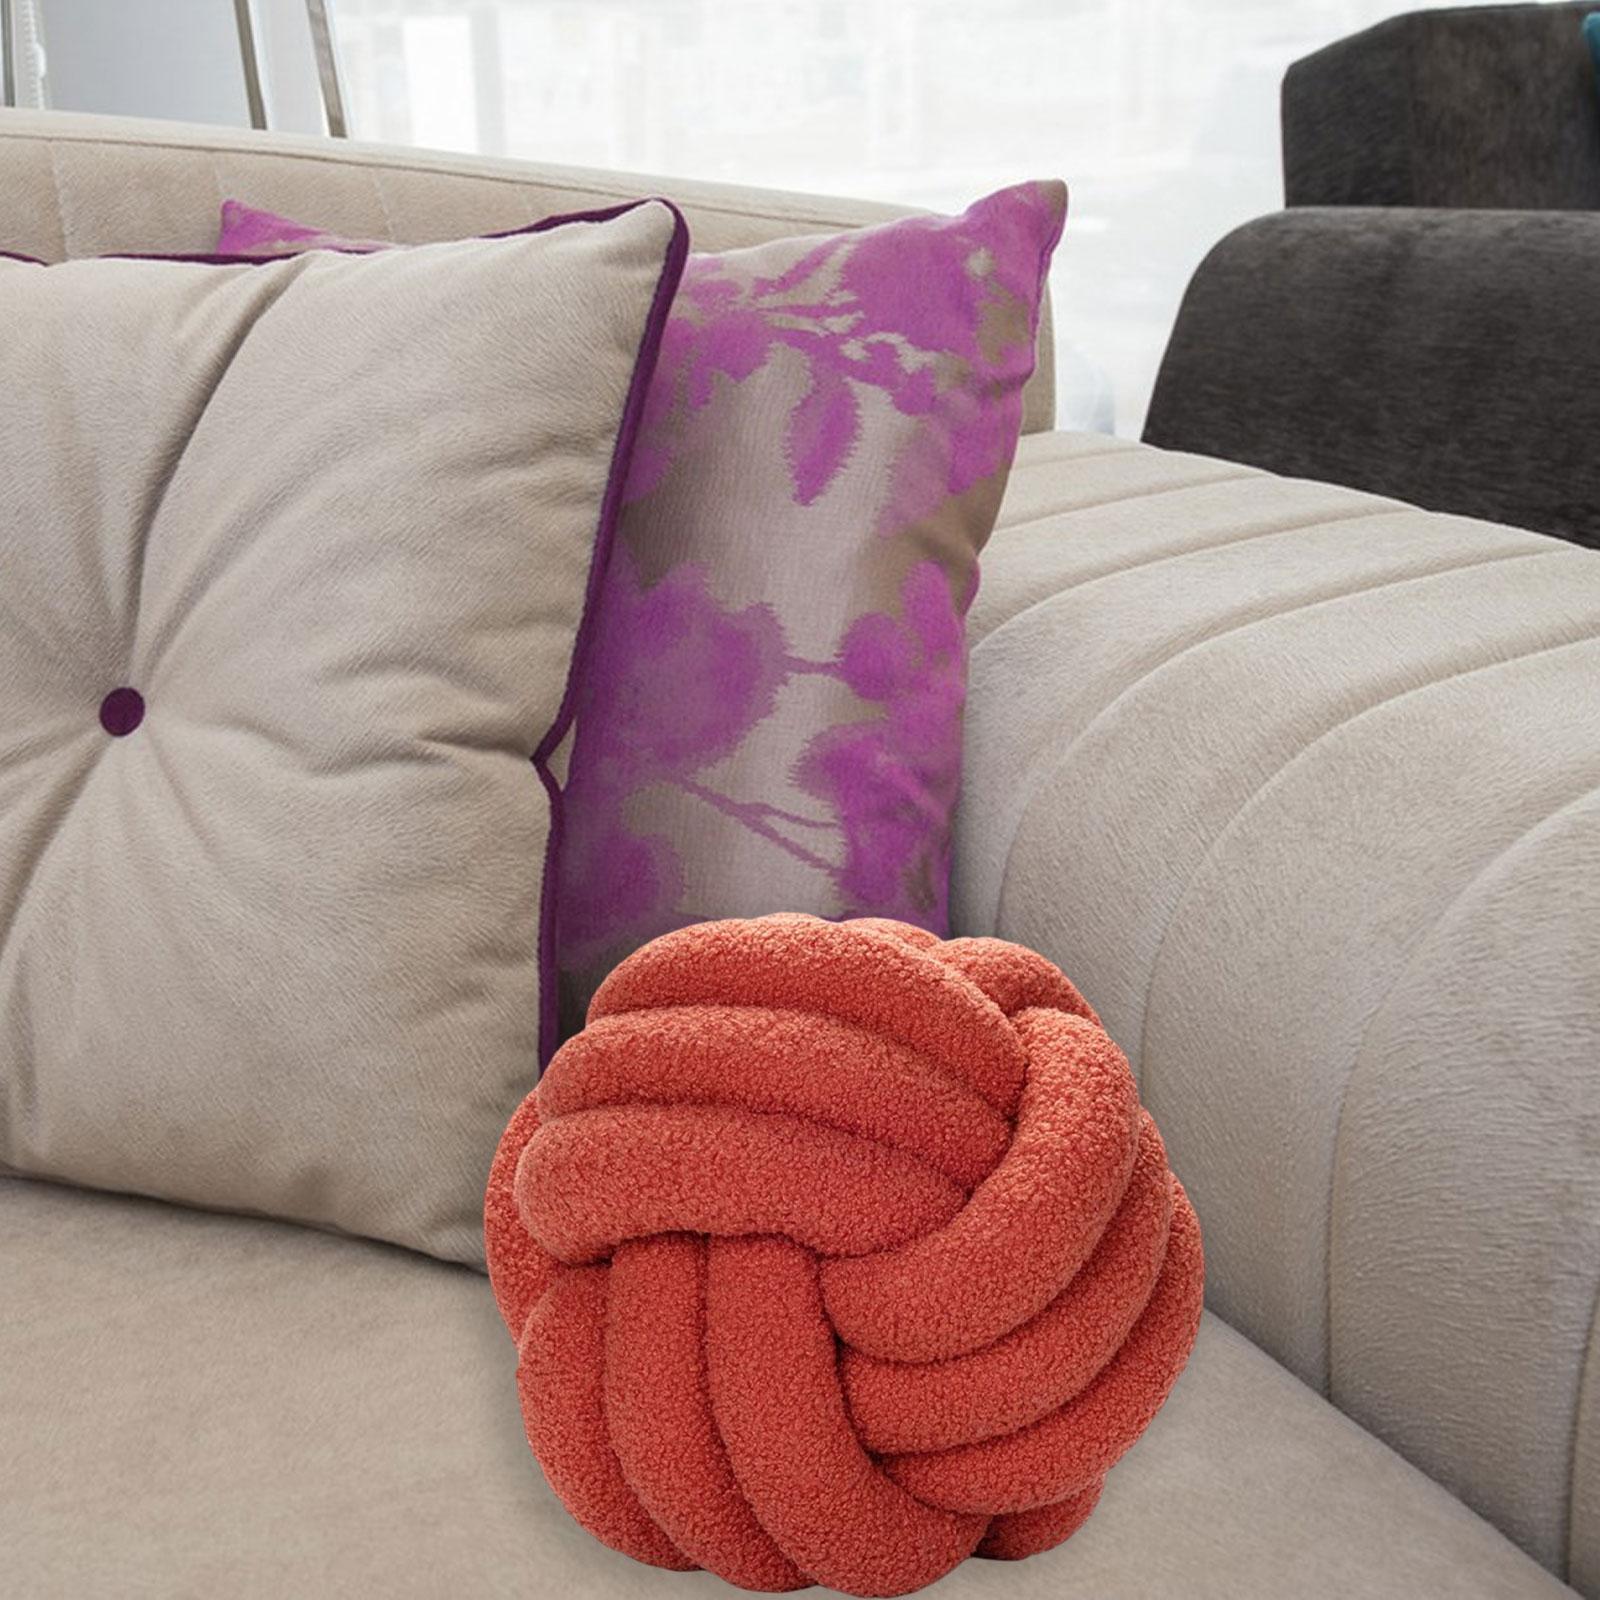 Plush Knot Ball Pillow Diameter 22cm Room Decoration for sofa Couch Red